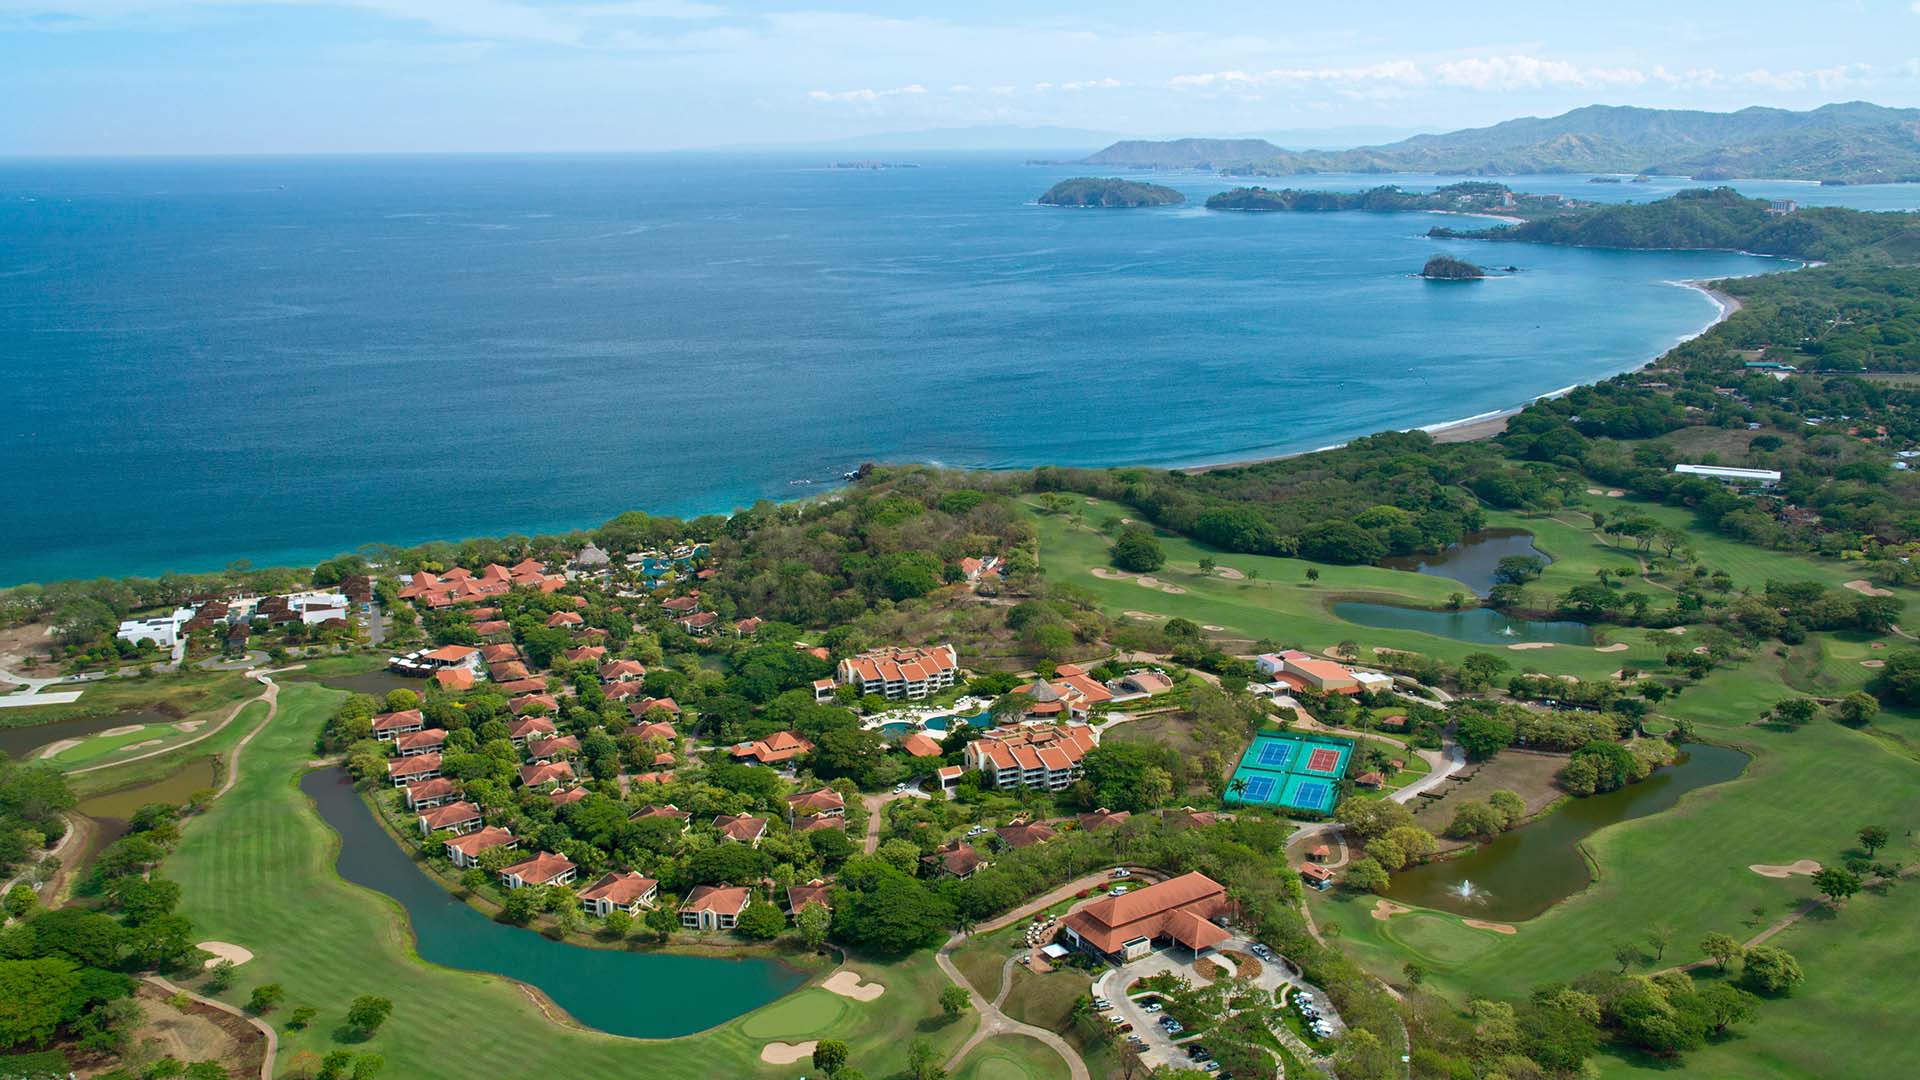 Aerial view of The Westin Reserva Conchal, an All-Inclusive Golf Resort & Spa